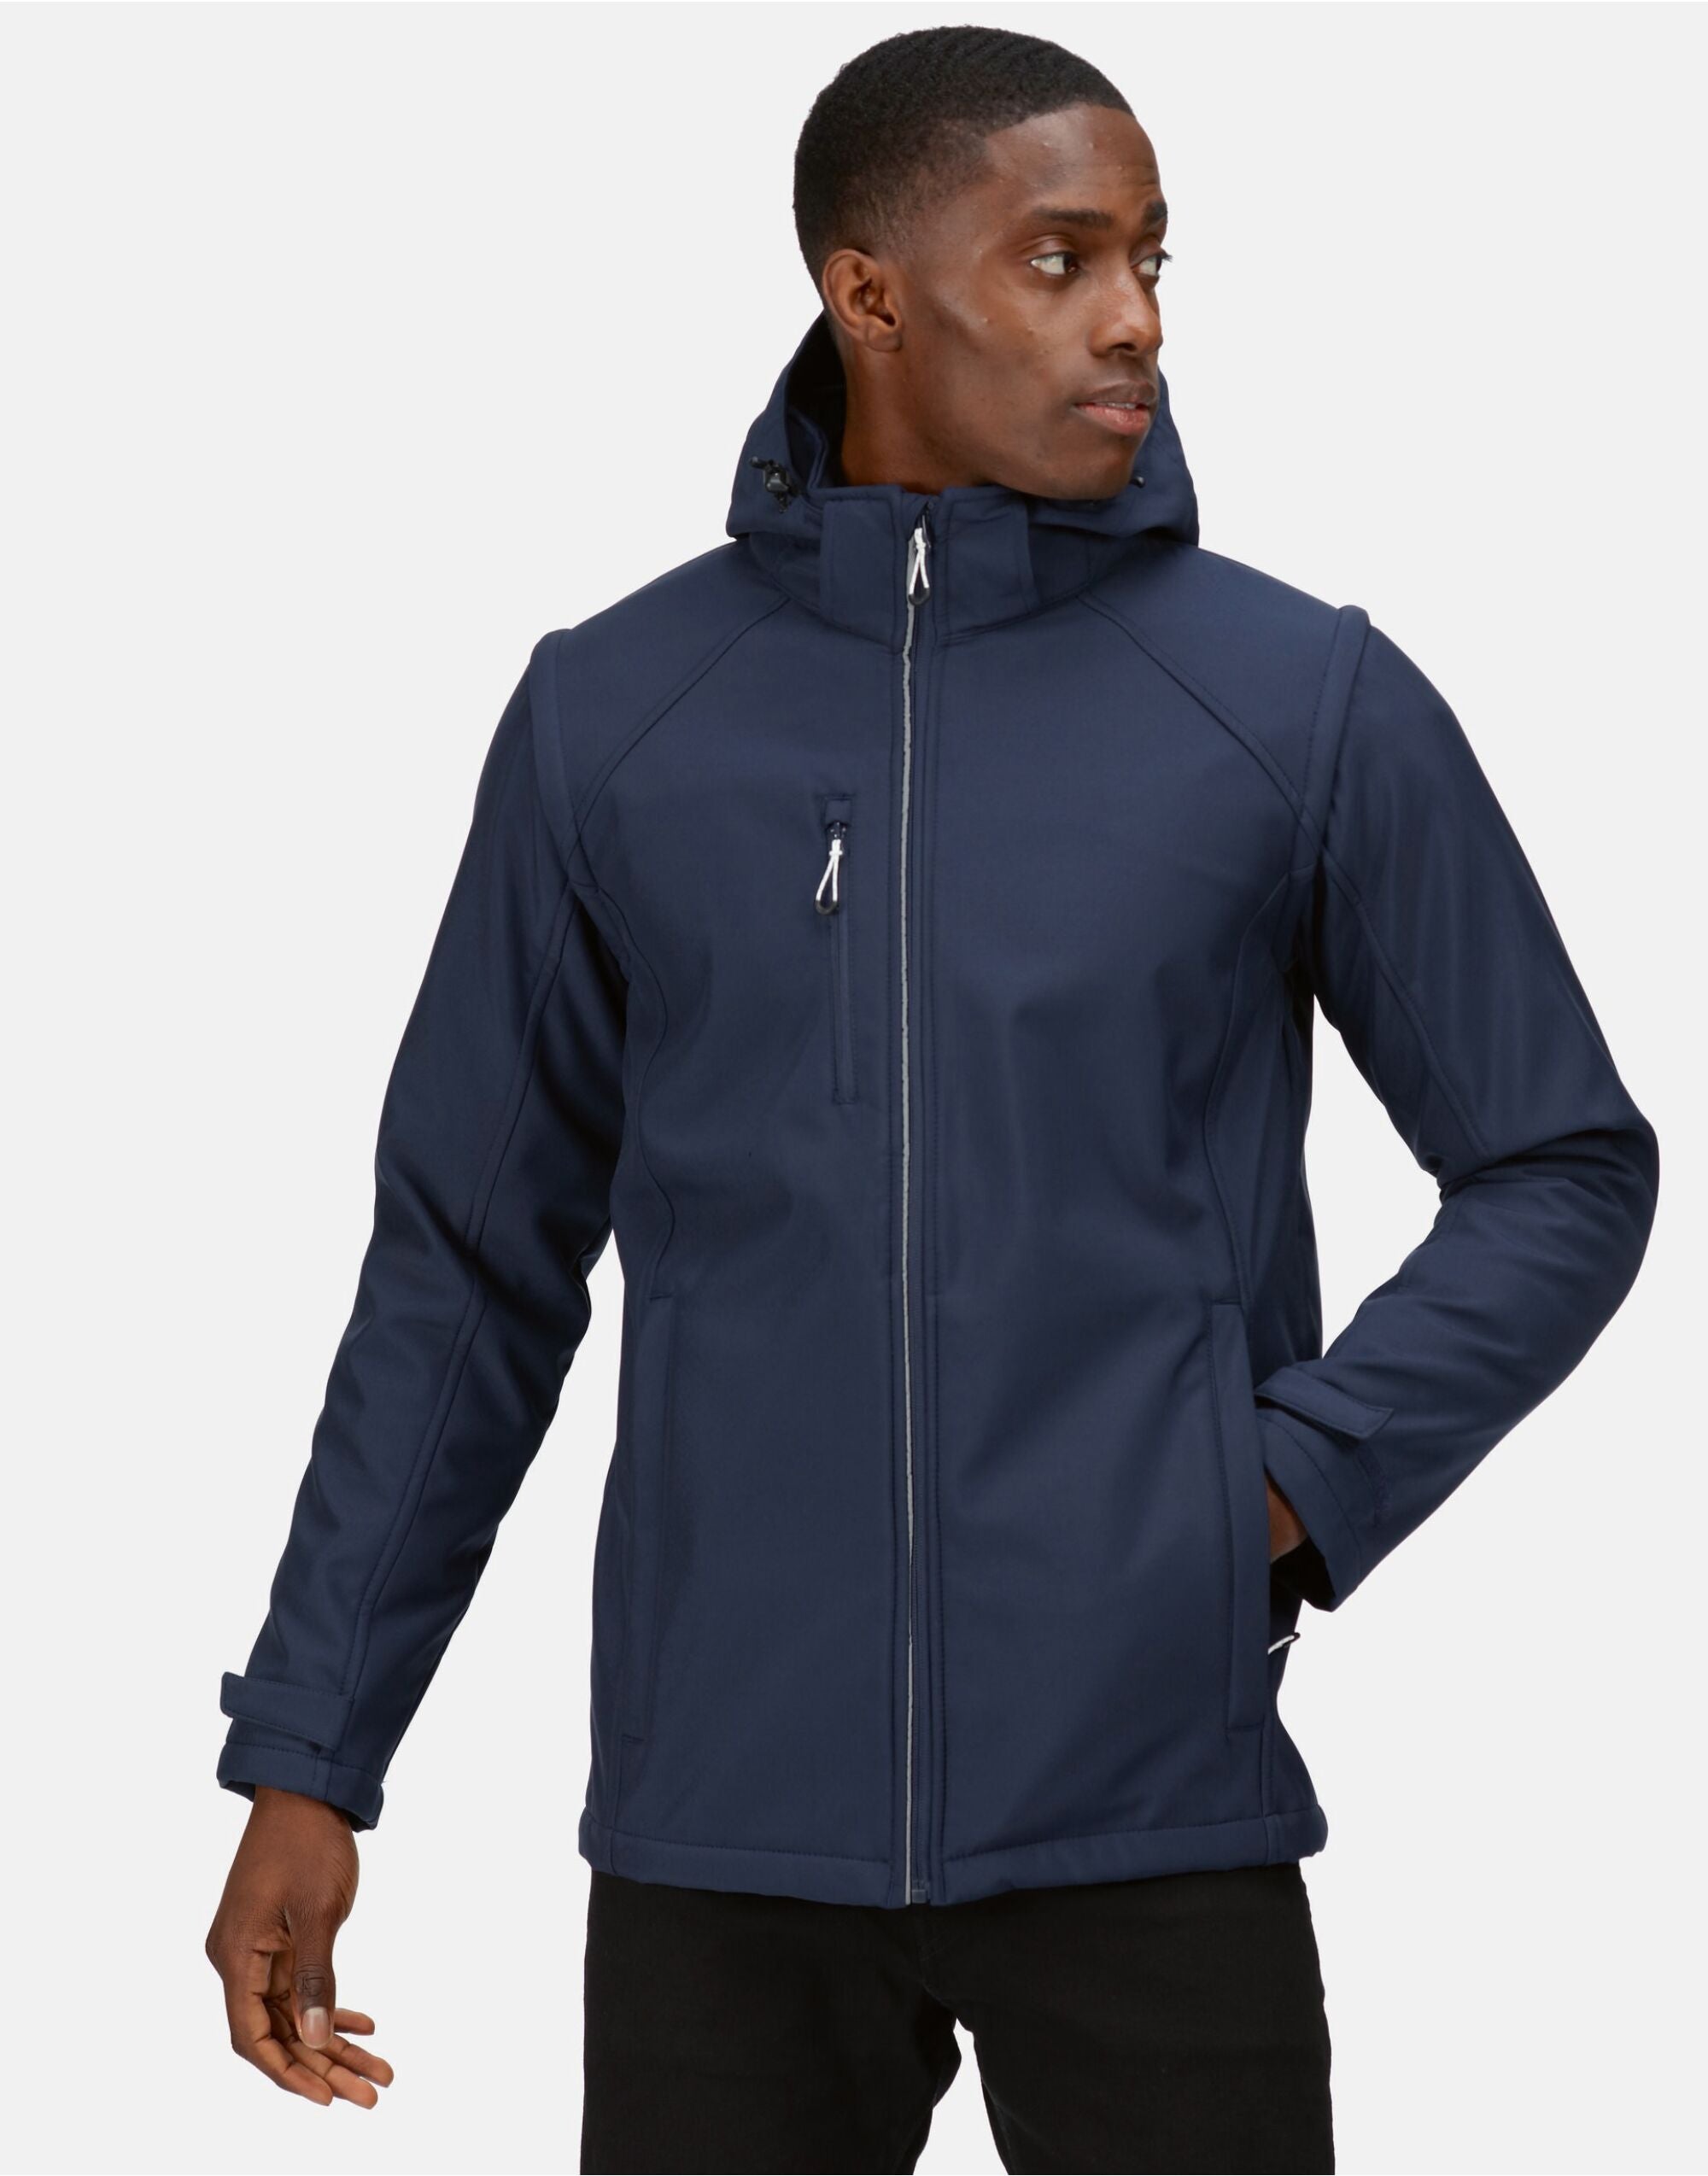 Regatta Professional Men's Erasmus 4-In-1 Softshell Jacket Warm backed woven XPT waterproof and breathable 3 layer membrane fabric (TRA713)